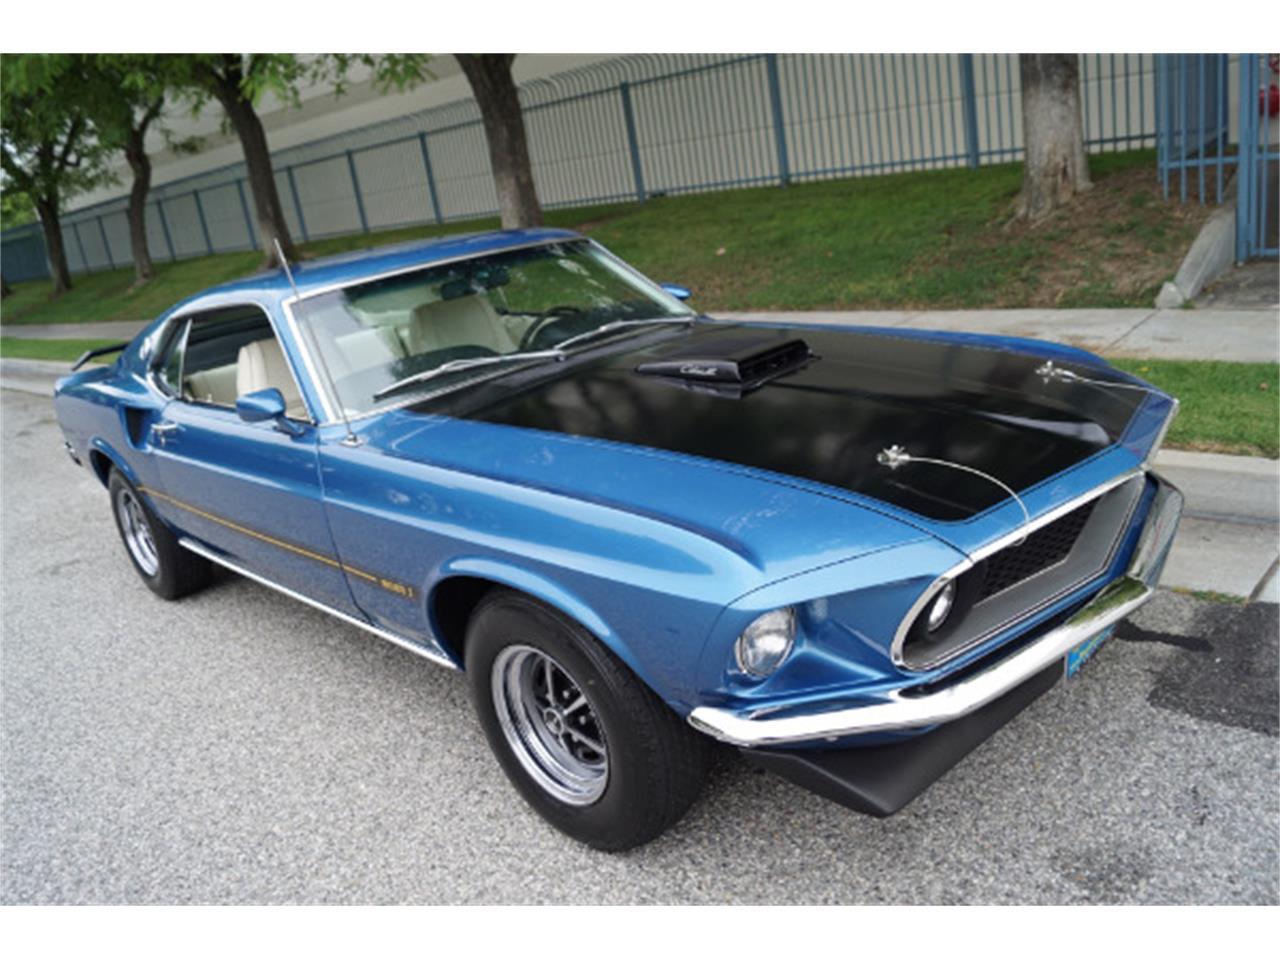 1969 Ford Mustang Mach 1 for Sale | ClassicCars.com | CC-986643